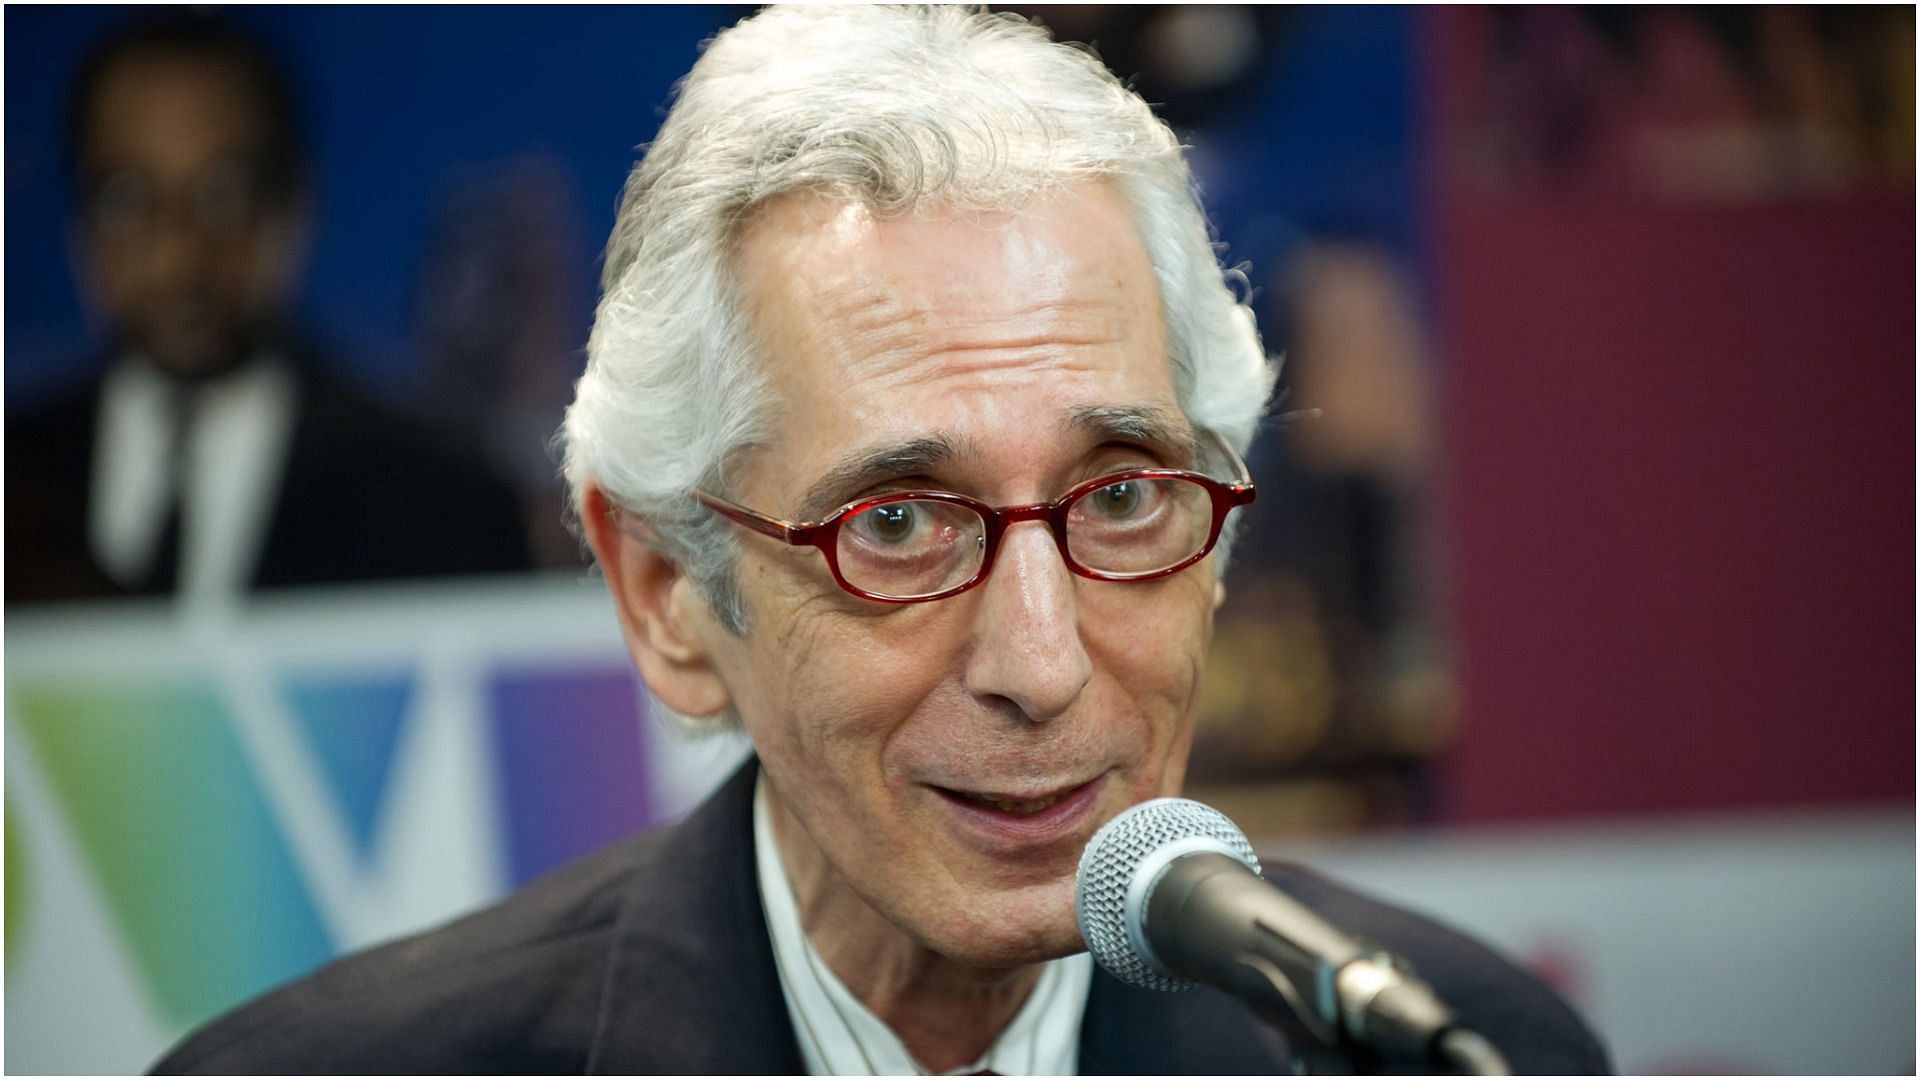 Pat Martino attends Kevin Eubanks plaque unveiling on the Philadelphia Walk Of Fame on June 17, 2010 in Philadelphia, Pennsylvania (Image via Getty Images)